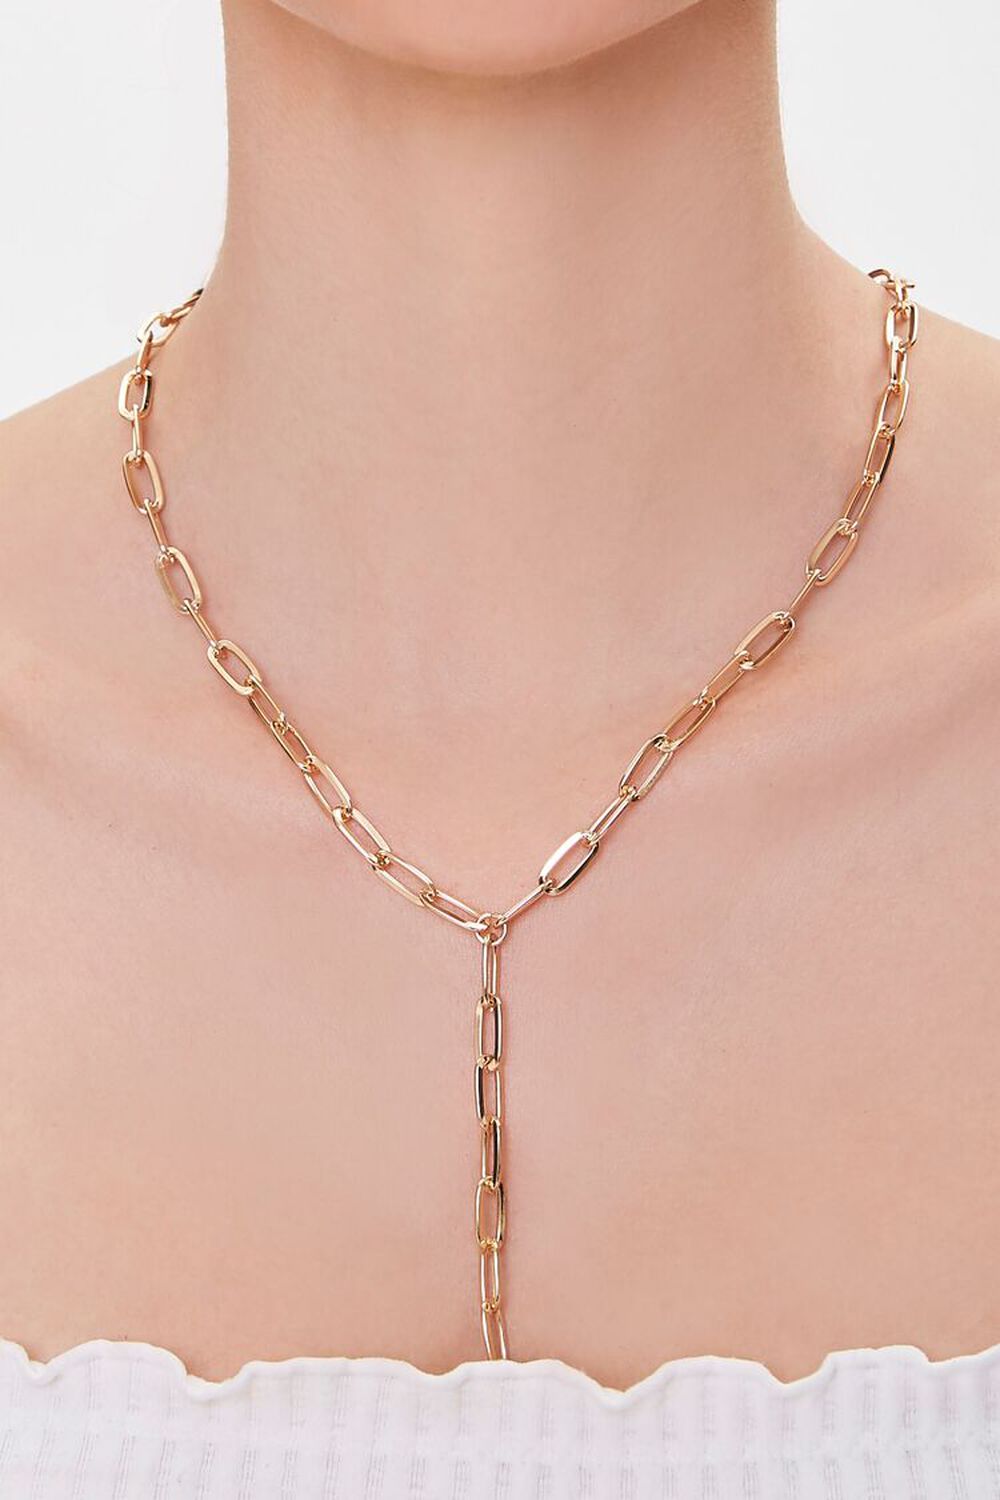 GOLD Anchor Y-Chain Necklace, image 1